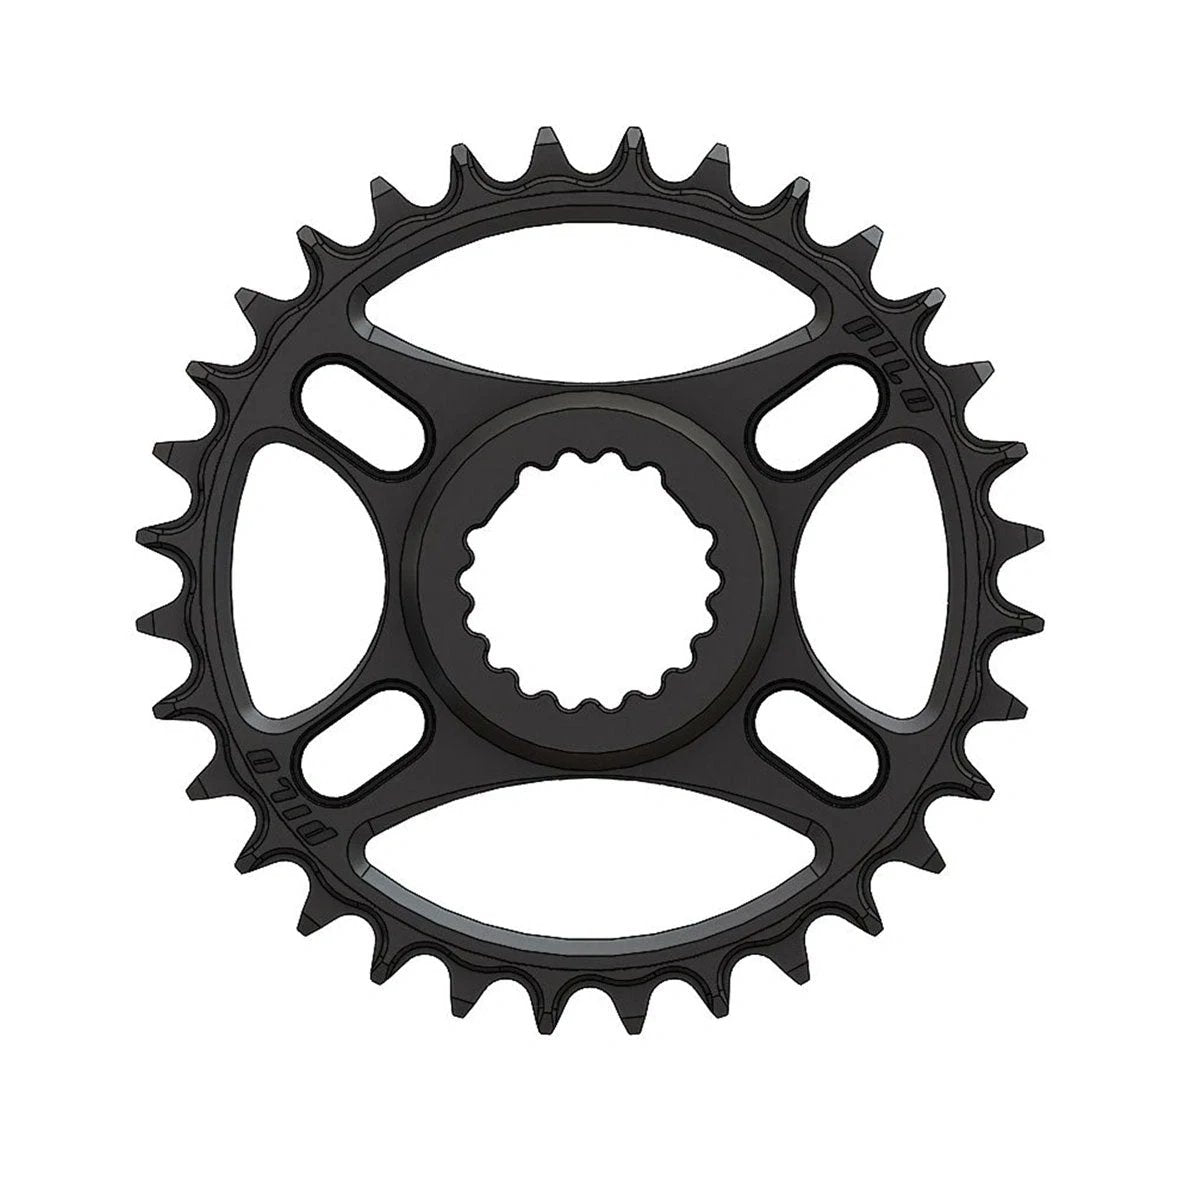 Pilo 32T Chainring For Cannondale Cranks - Replacement Chainrings